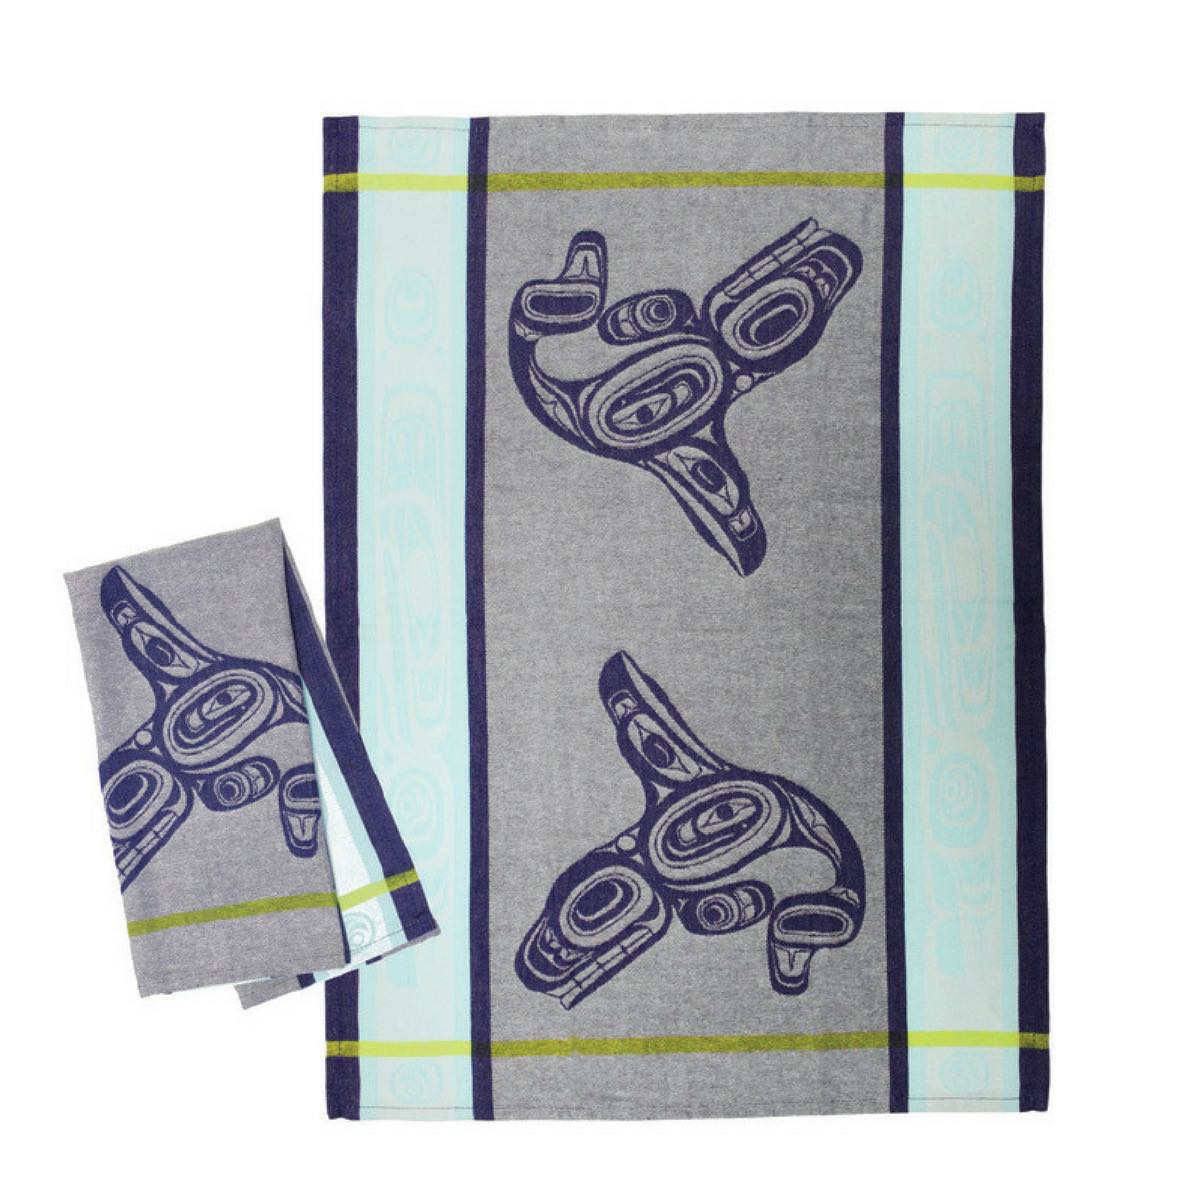 Tea Towel E Swanson Whale - Tea Towel E Swanson Whale -  - House of Himwitsa Native Art Gallery and Gifts